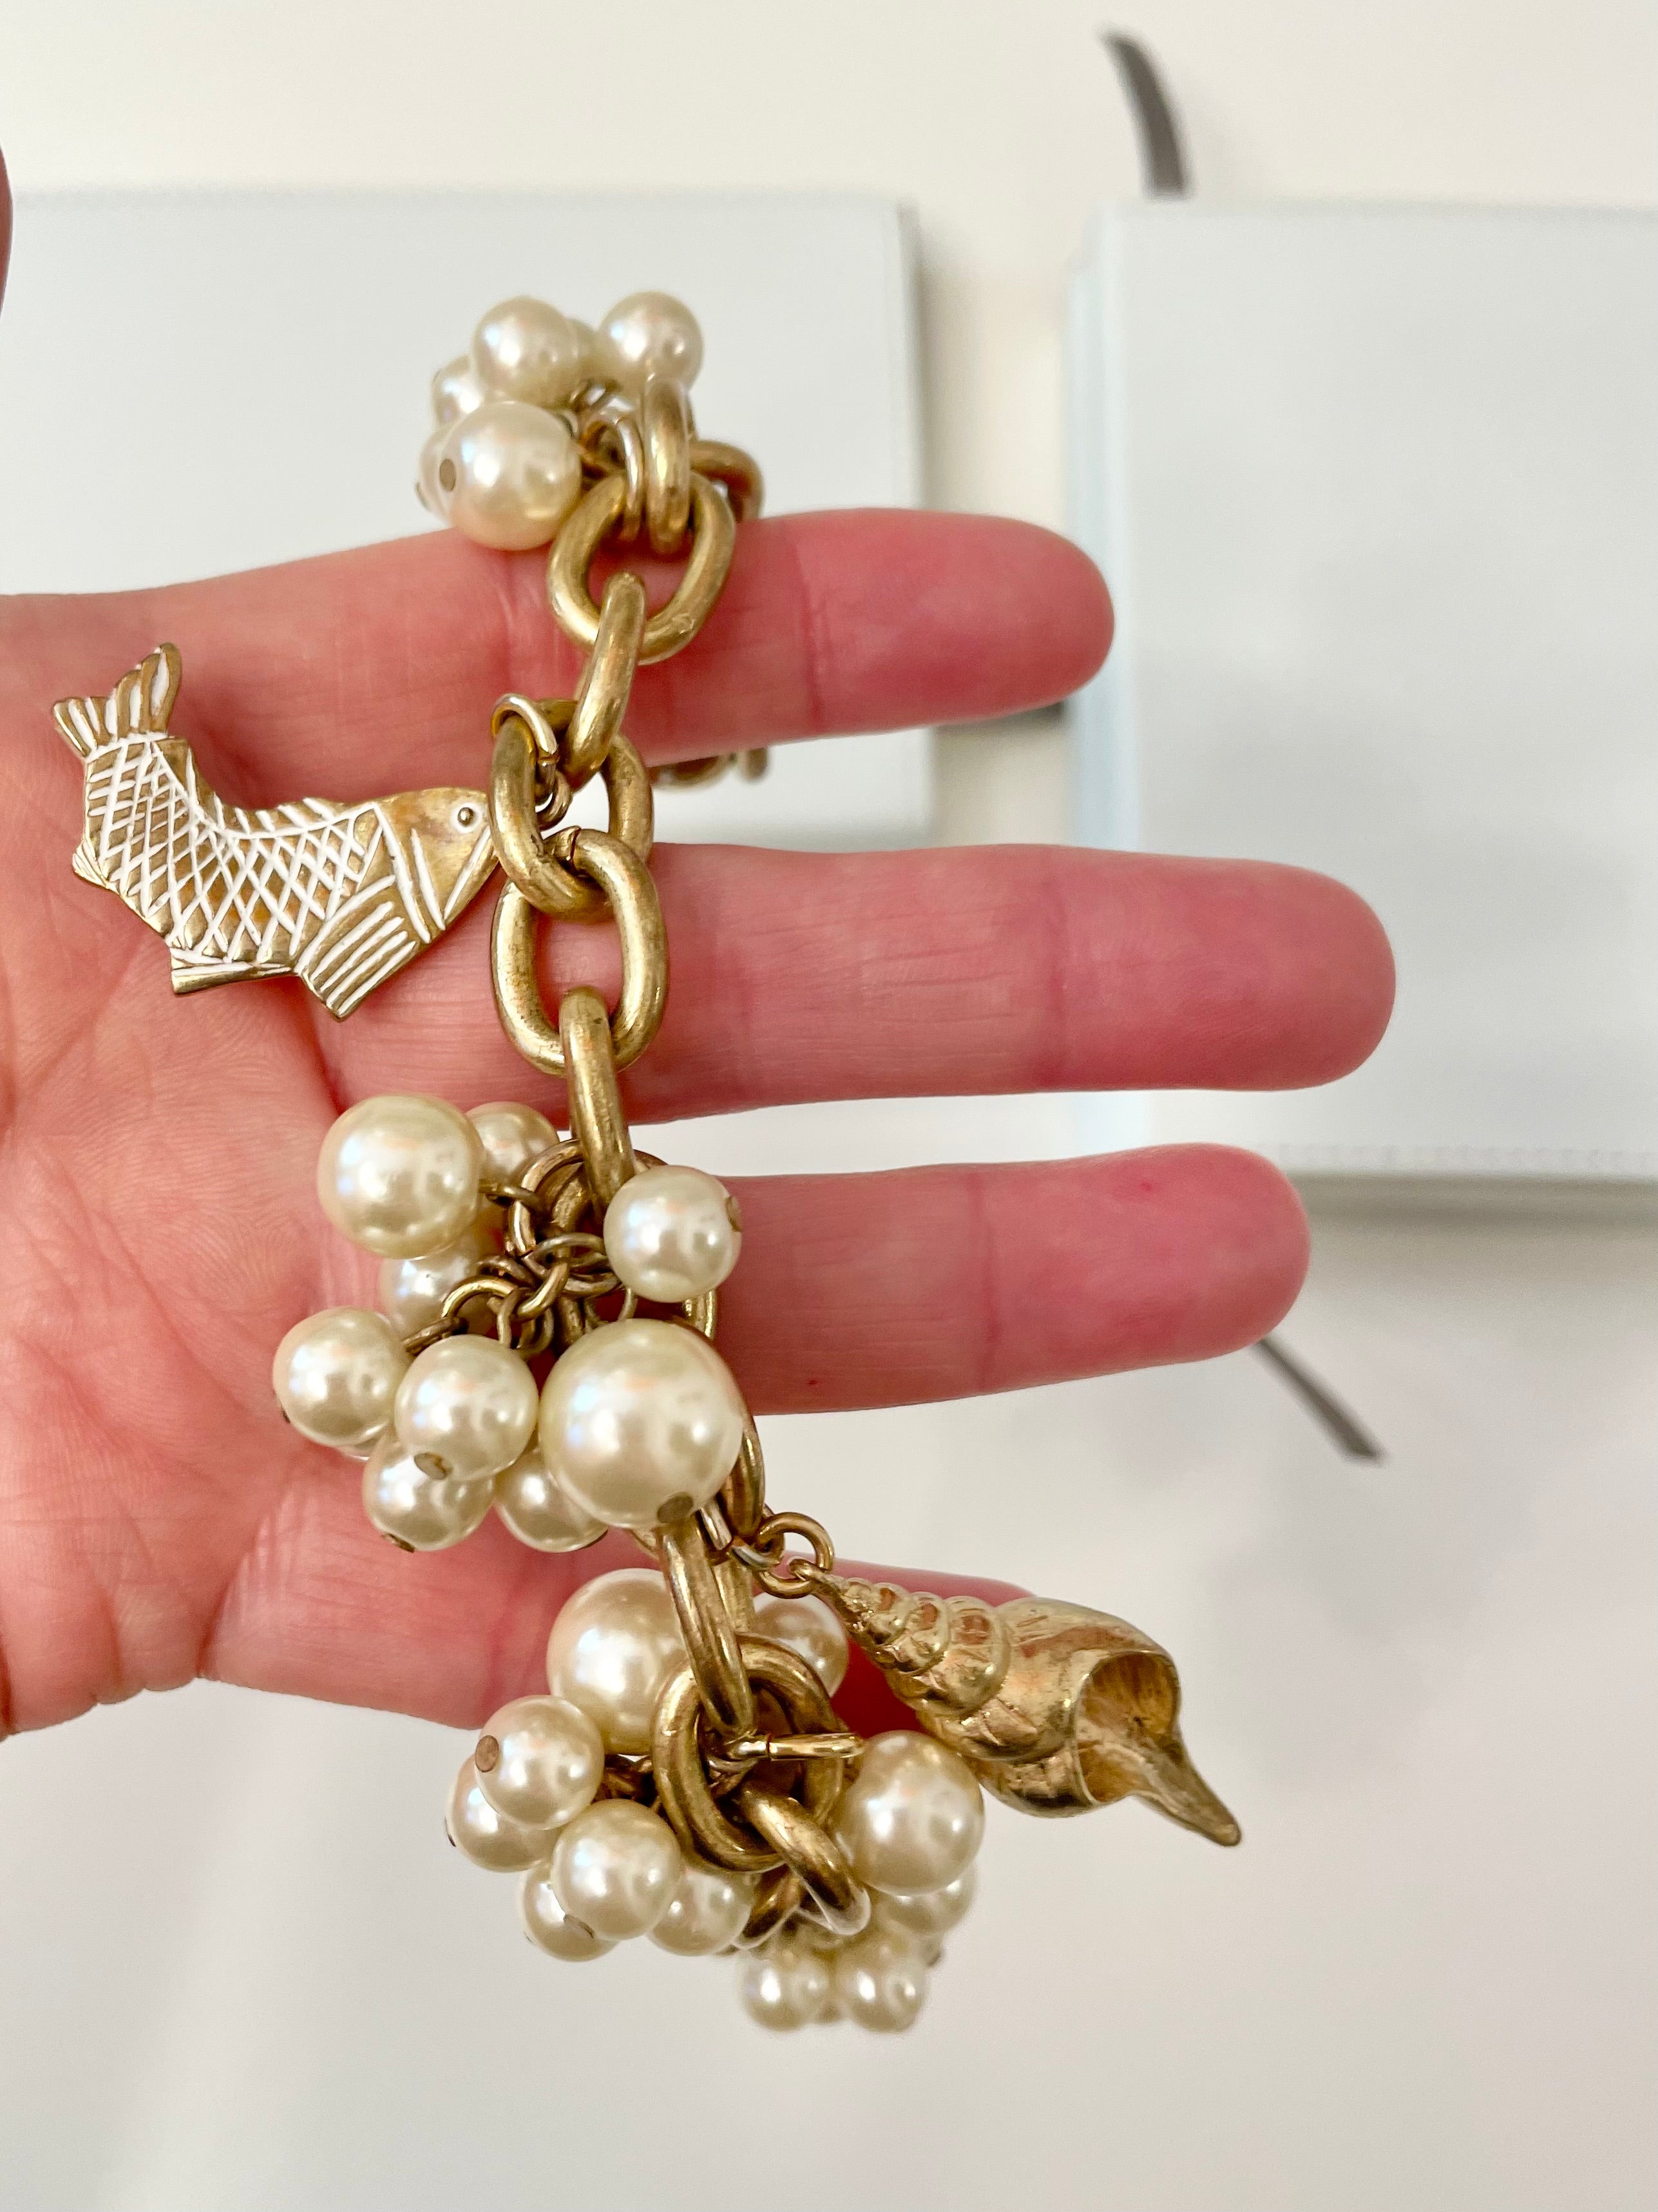 Charming figural and pearl classy charm bracelet..